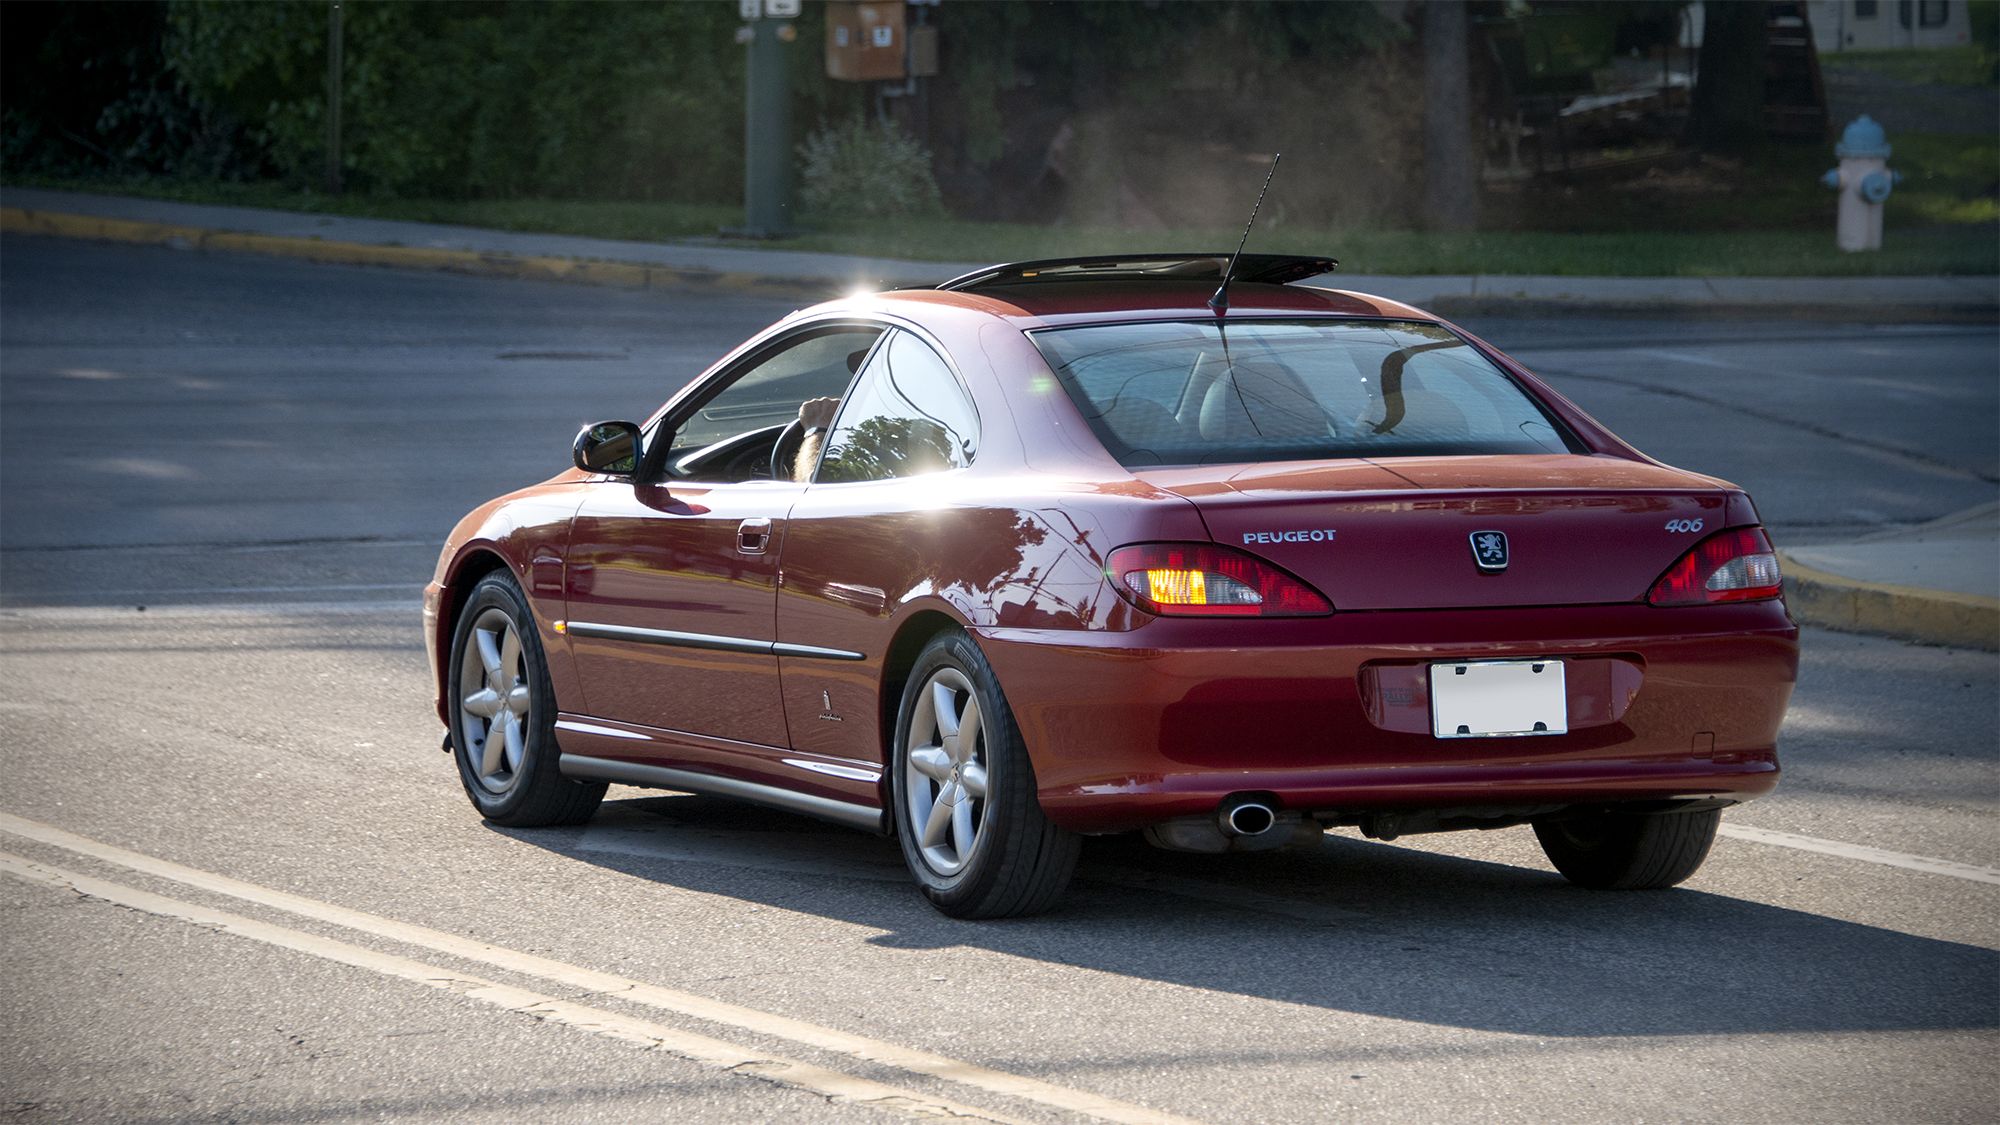 Peugeot 406 Coupe: review, history, prices and specs